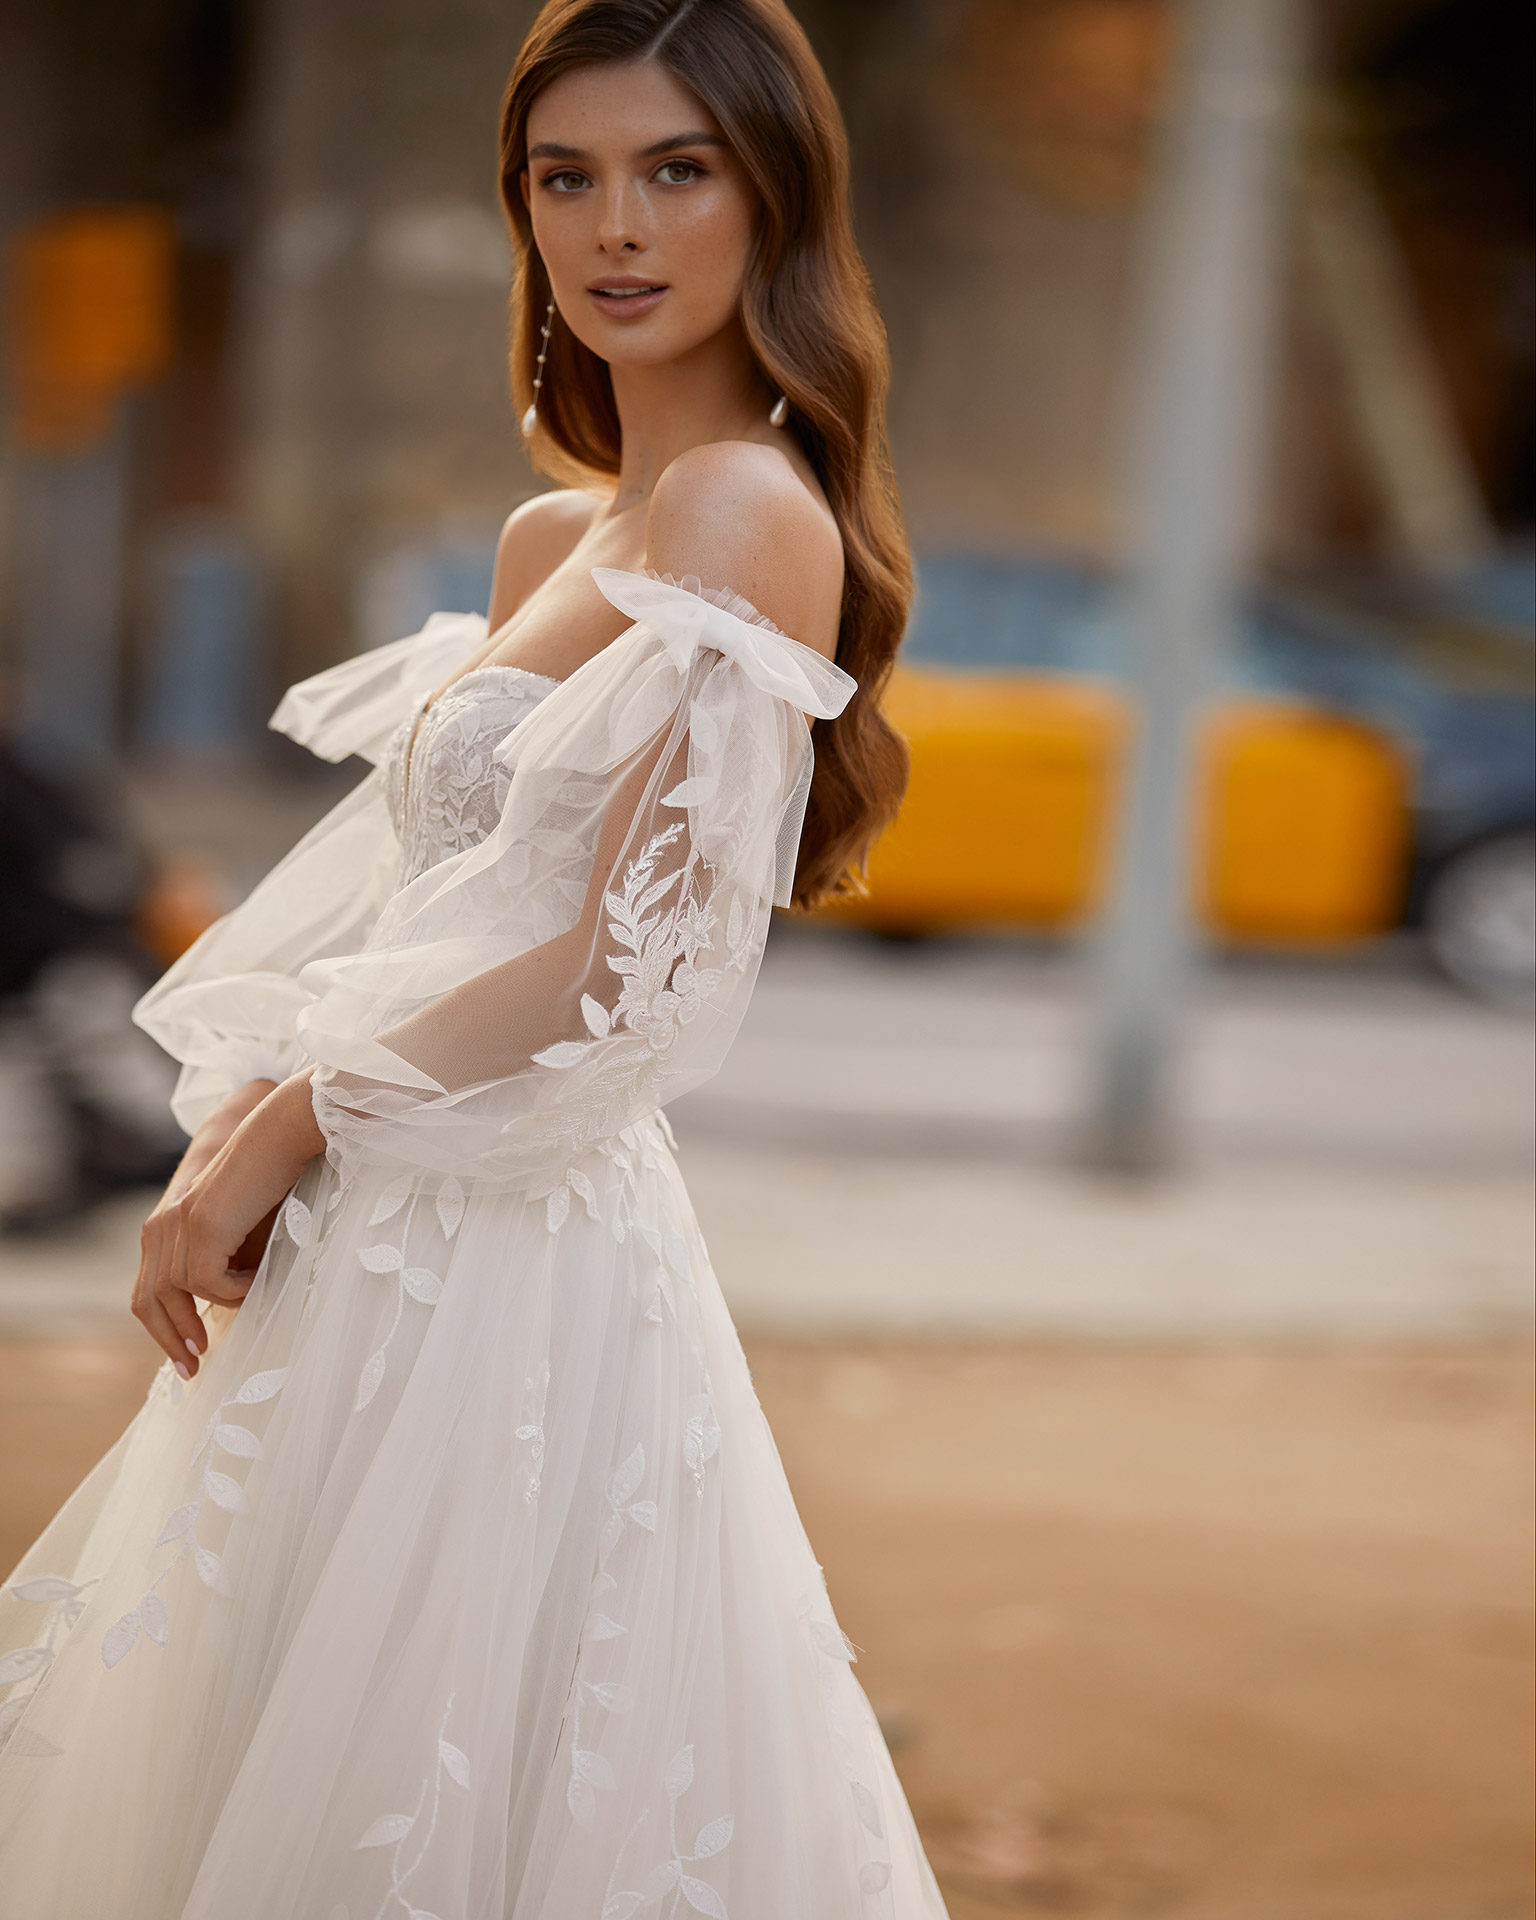 Romantic princess-style wedding dress, made of tulle and lace appliqués, with a sheath-style skirt with flounces; with a deep-plunge neckline with delicate beadwork detail, an open back, and voluminous tulle sleeves. Unique Luna Novias outfit made of tulle with lace appliqués. LUNA_NOVIAS.